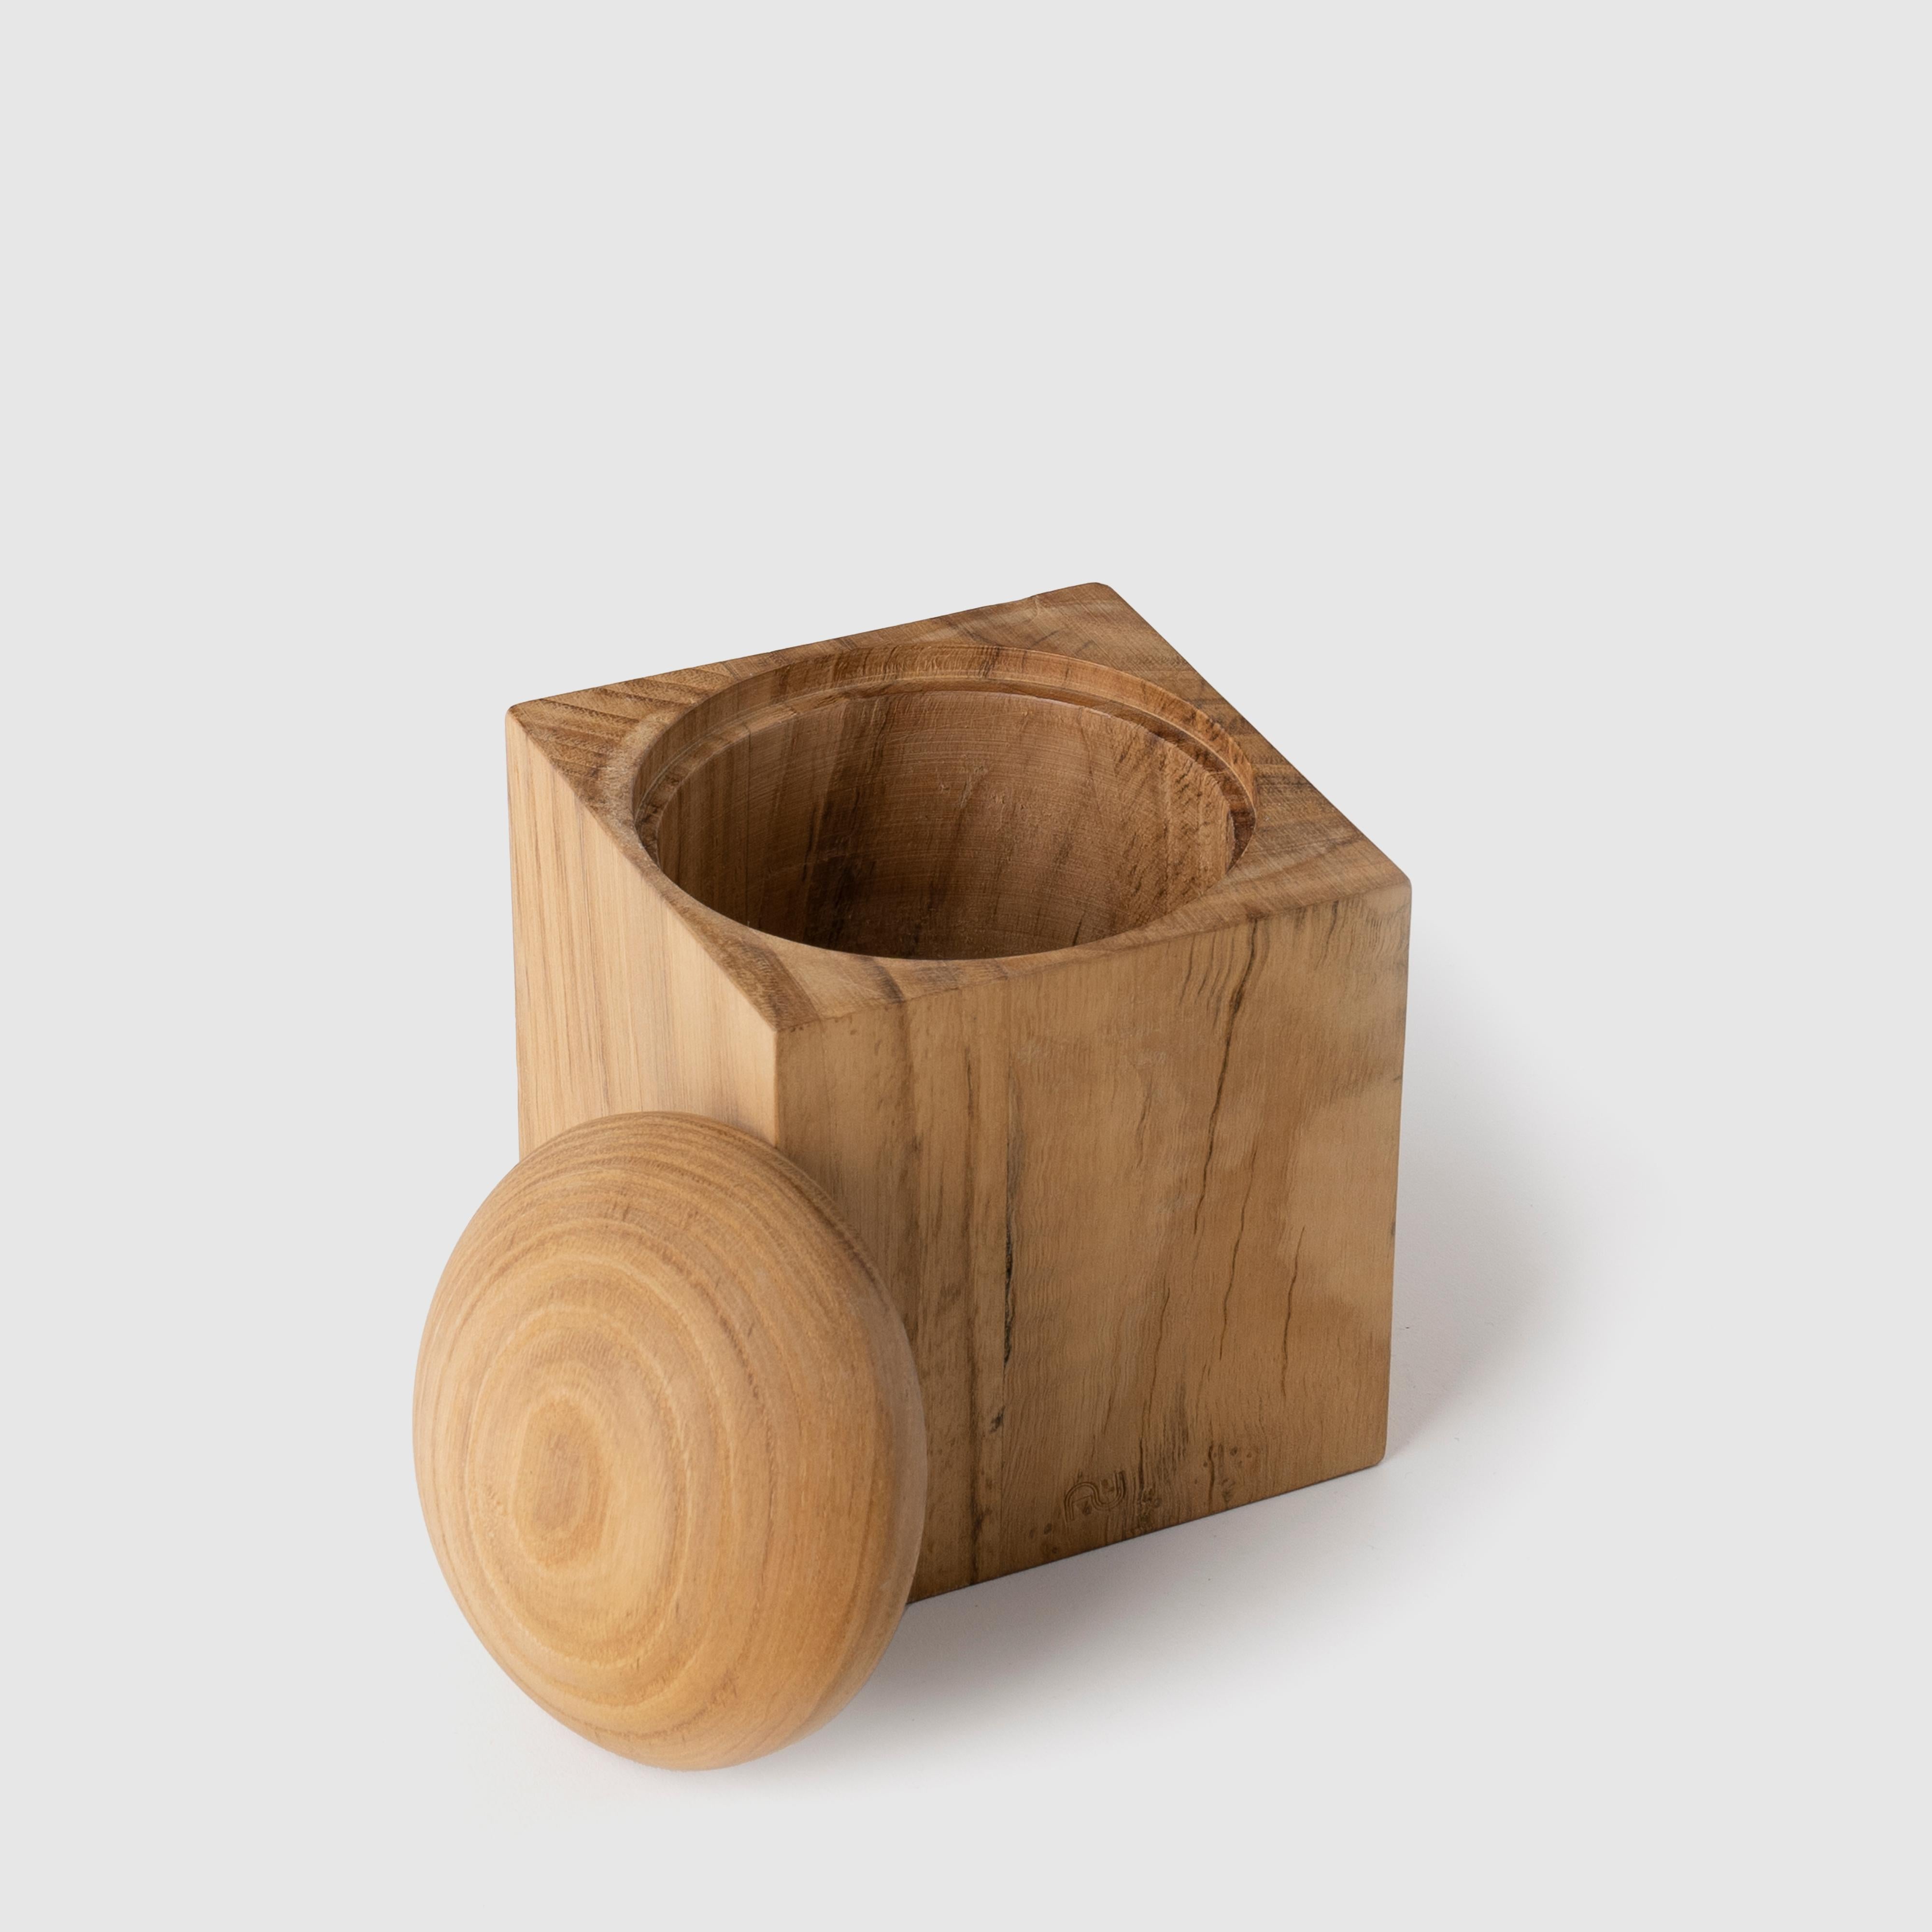 Turned Contemporary Modern, Bebek Chestnut Wood Single-Compartment Box For Sale